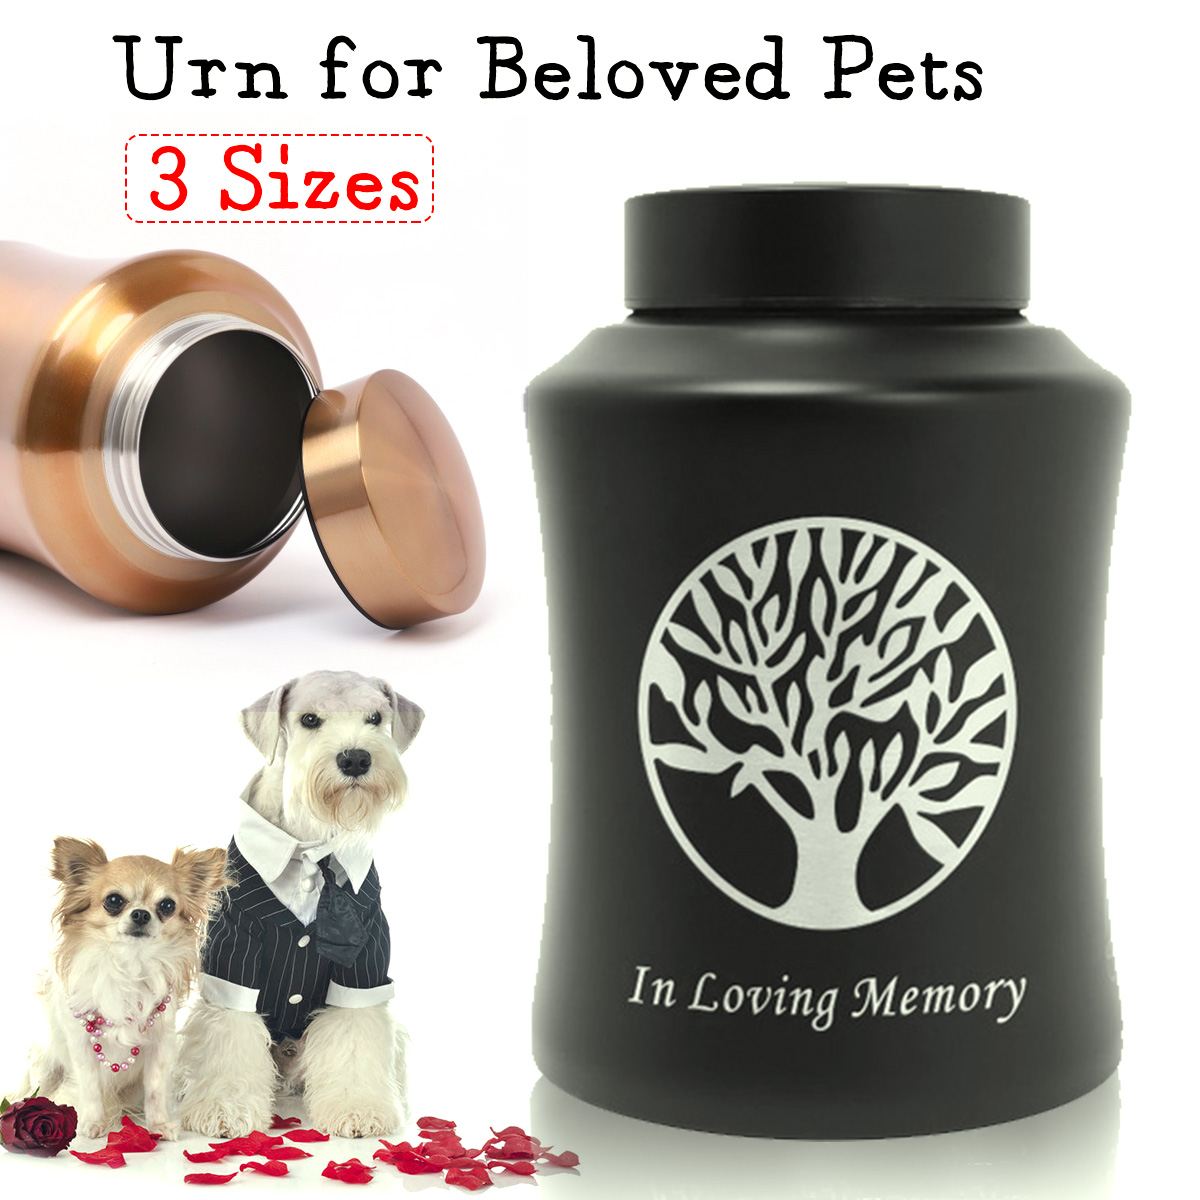 Pet Memorial Urn For Dogs Cats Birds 800/500/250ml Cremation Ashes Holder Small Animals Mouse Rabbits Fish Funeral Casket